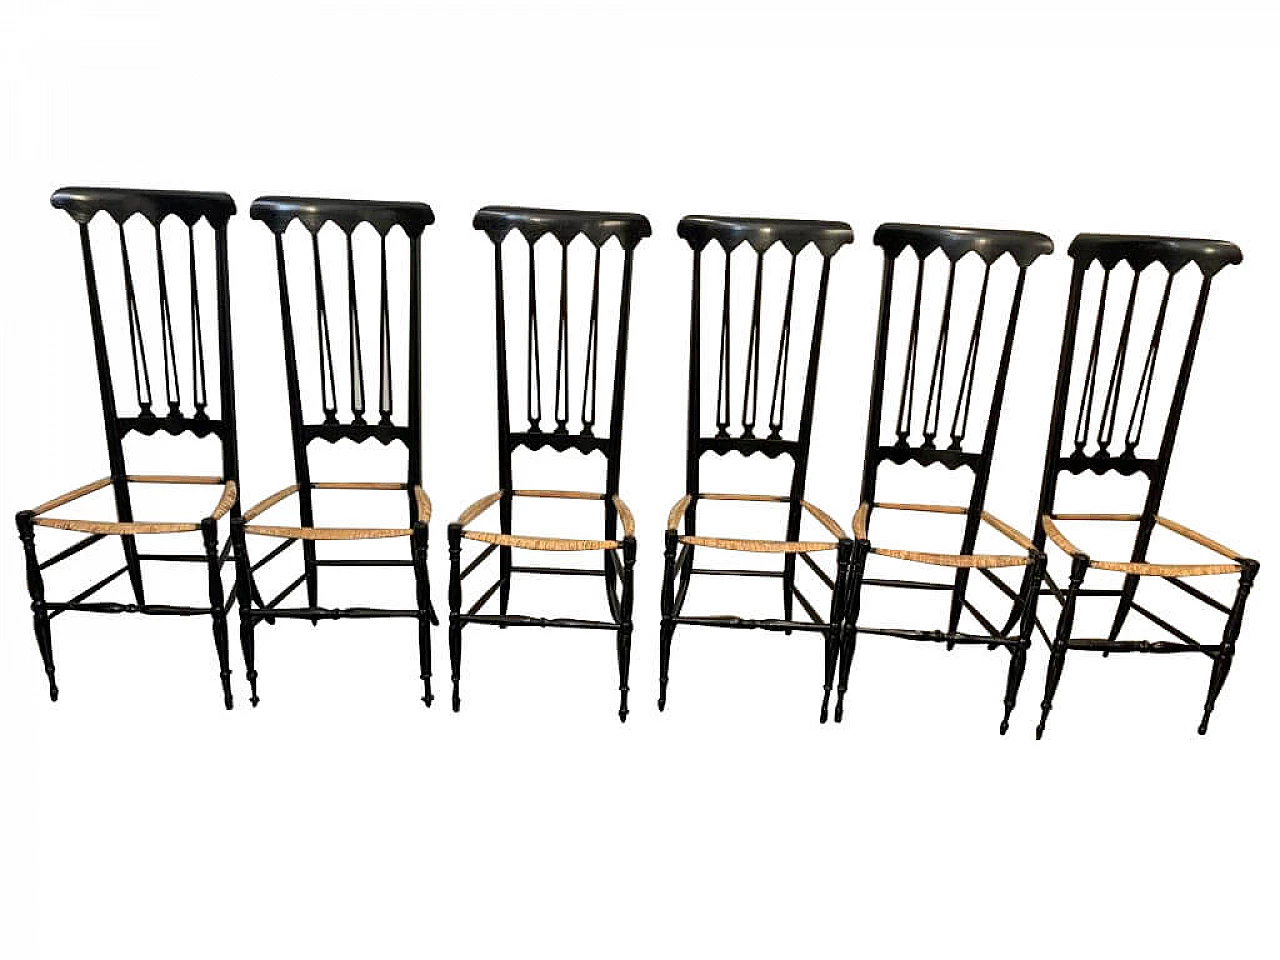 6 Chairs by S.A.C. Chiavari in the style of Gio Ponti, 1950s 1213793